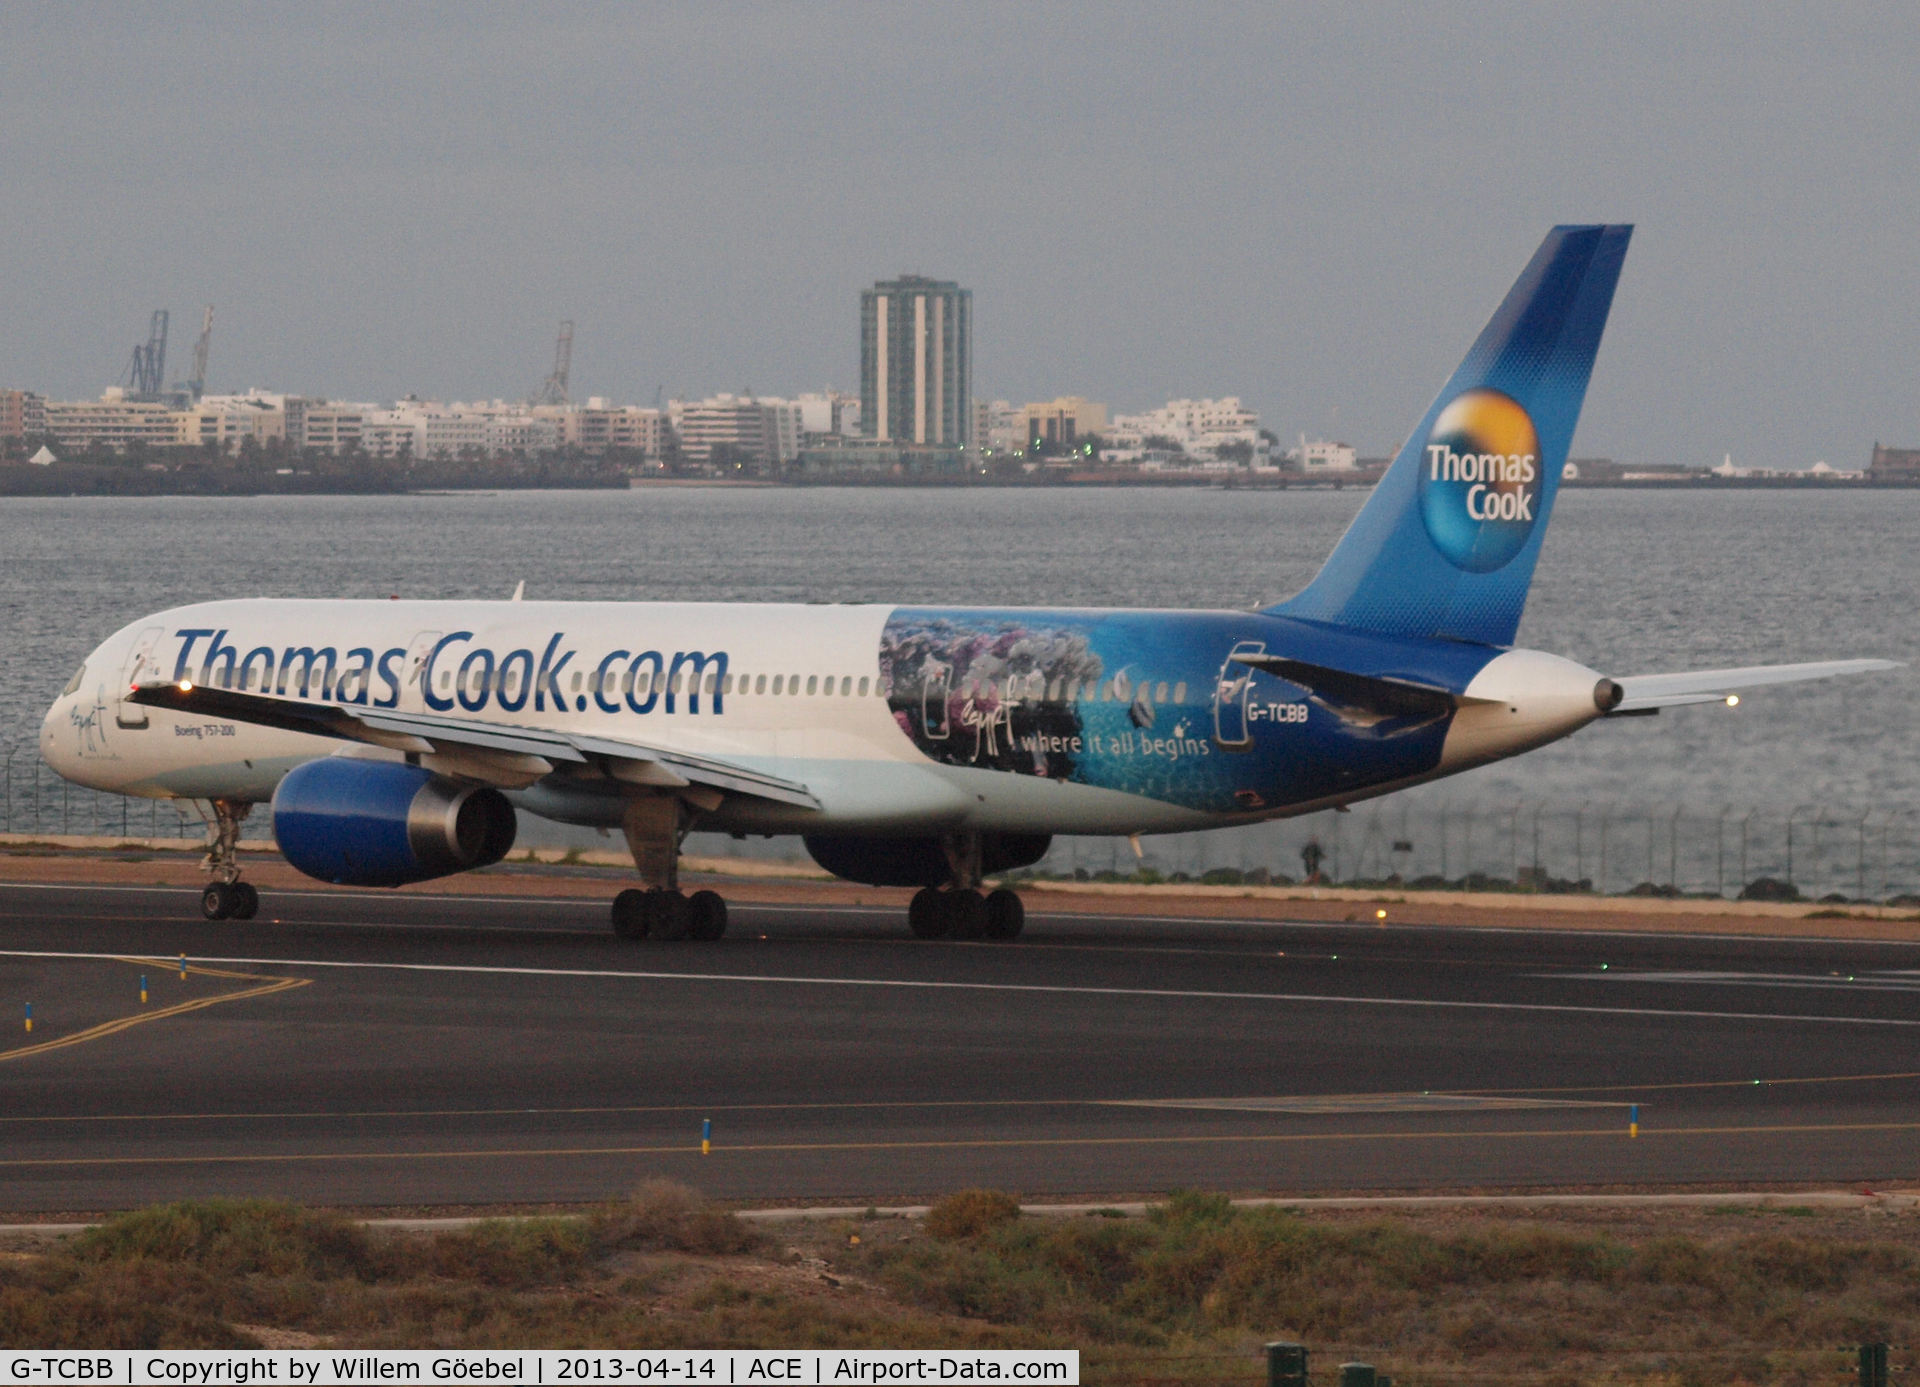 G-TCBB, 1999 Boeing 757-236 C/N 29945, Taxi to the runway of Lanzarote Airport